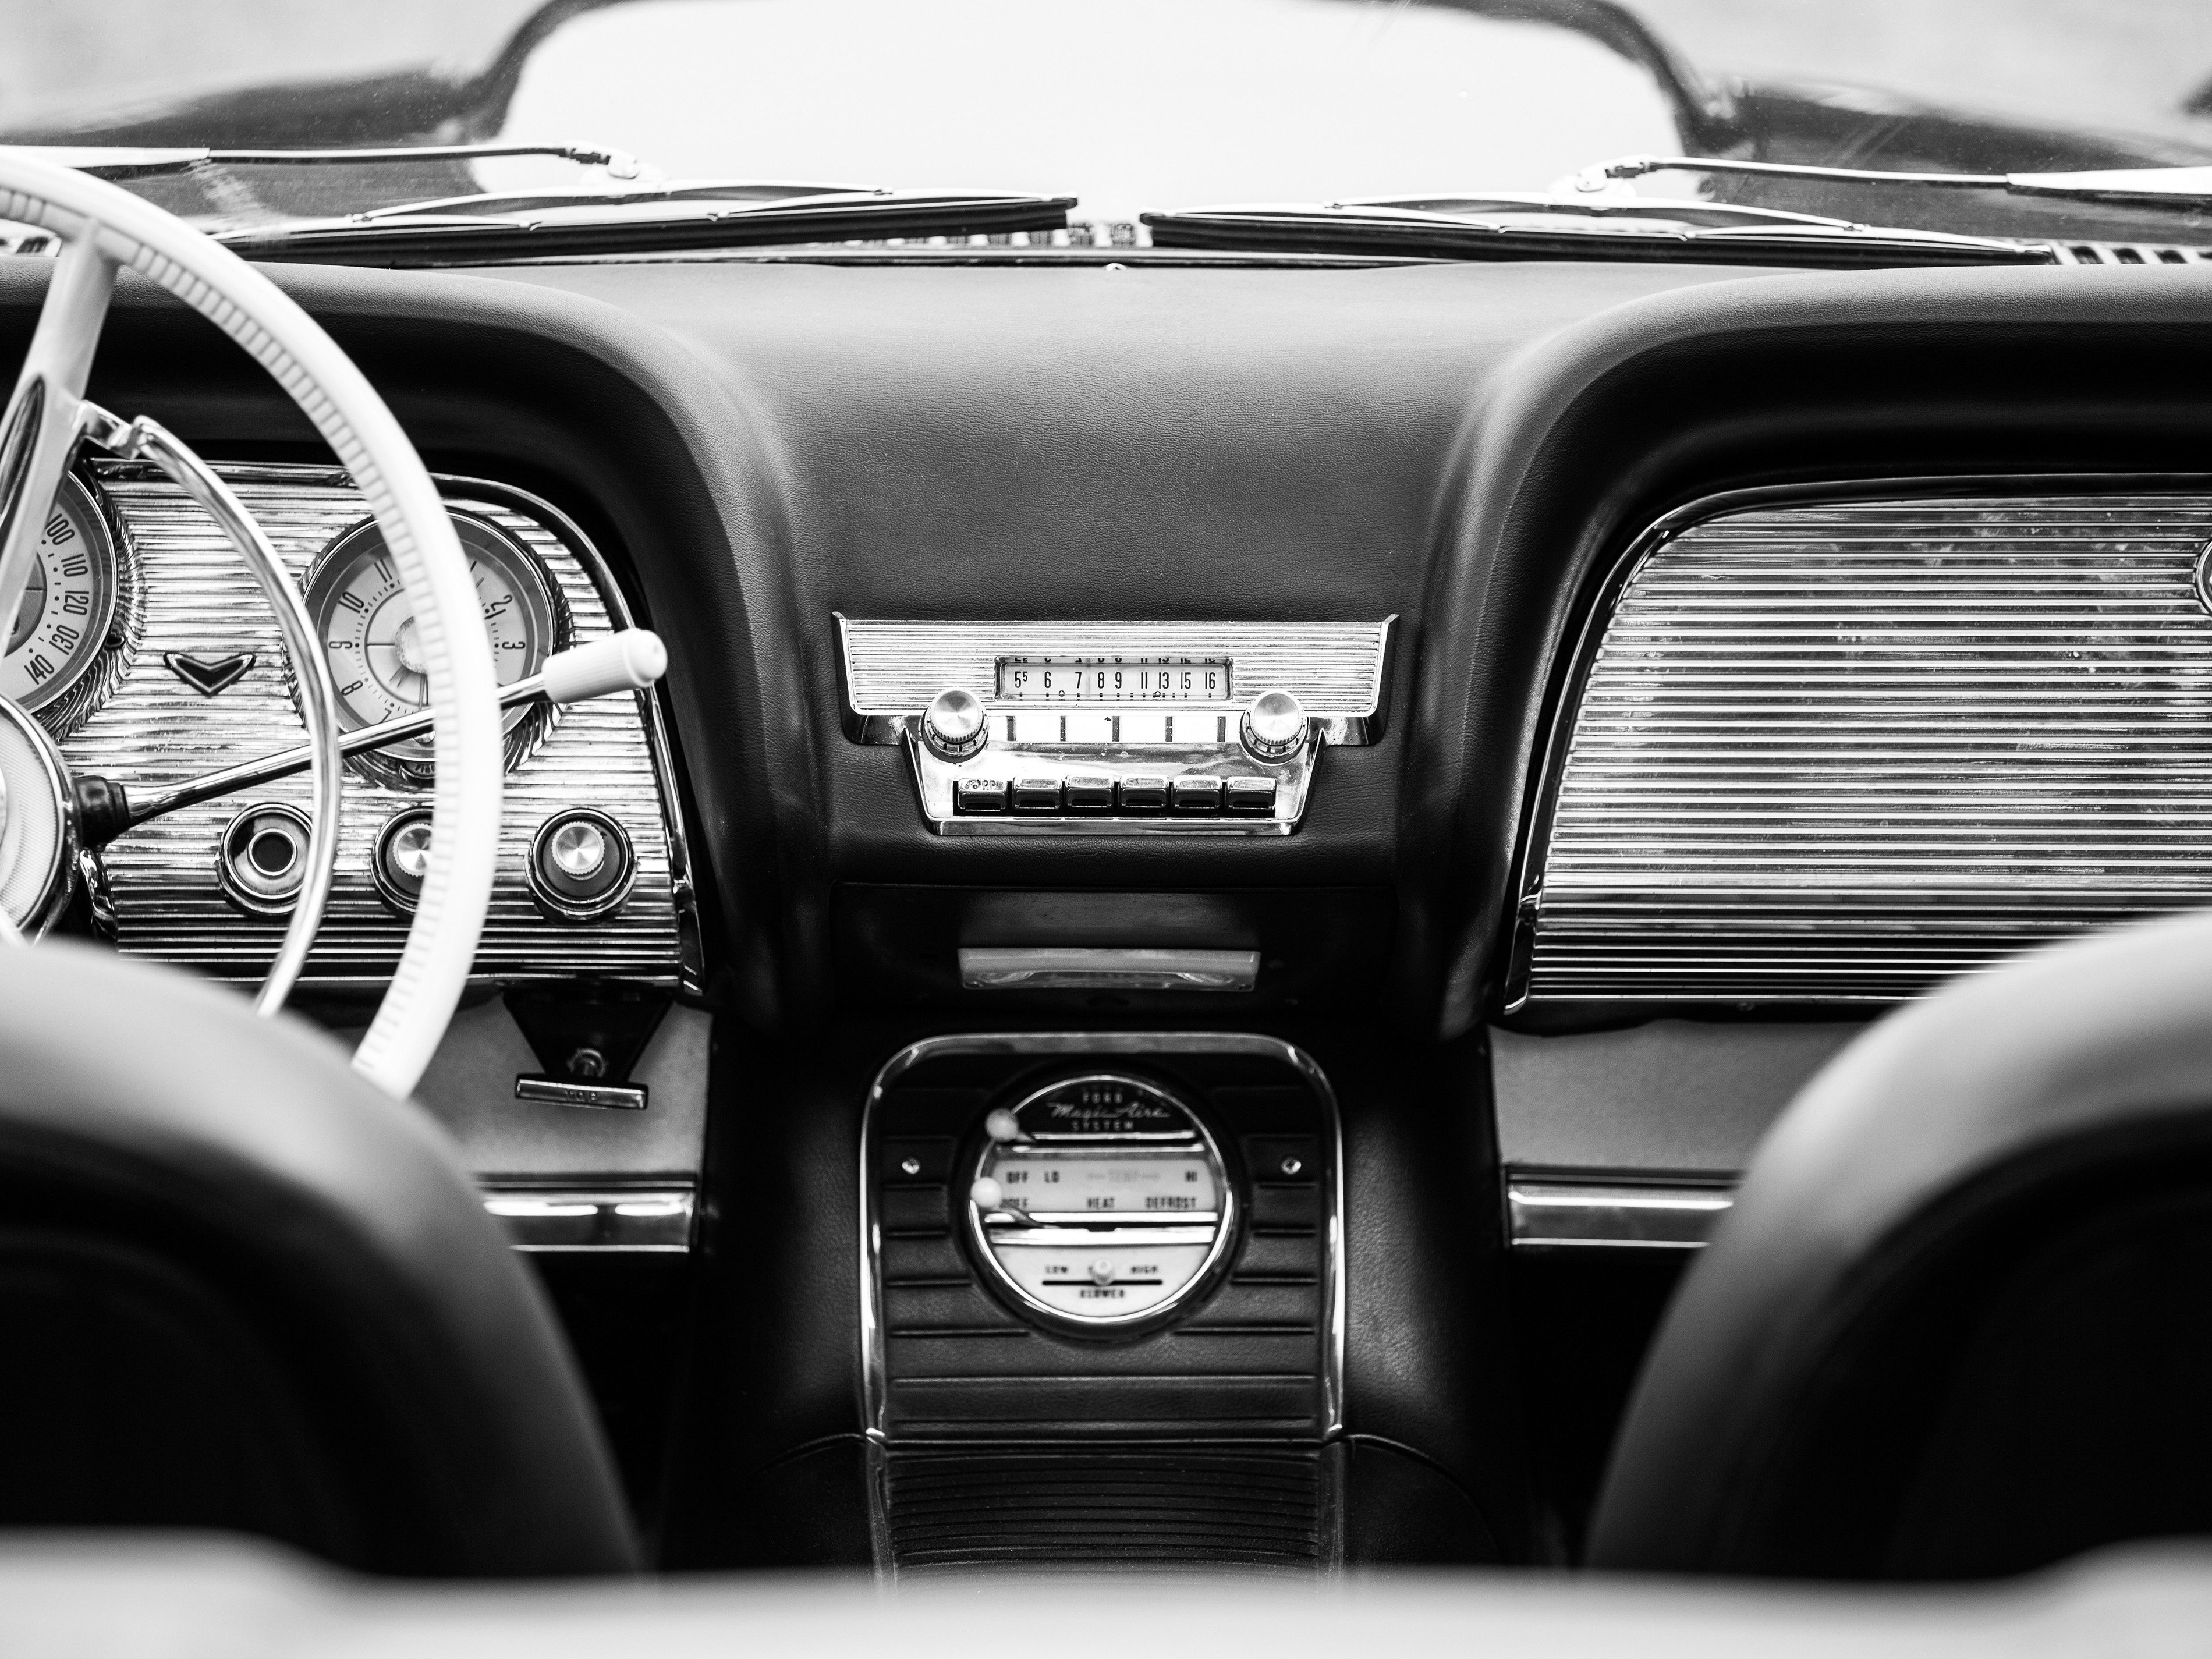 The cost of authentic car accessories